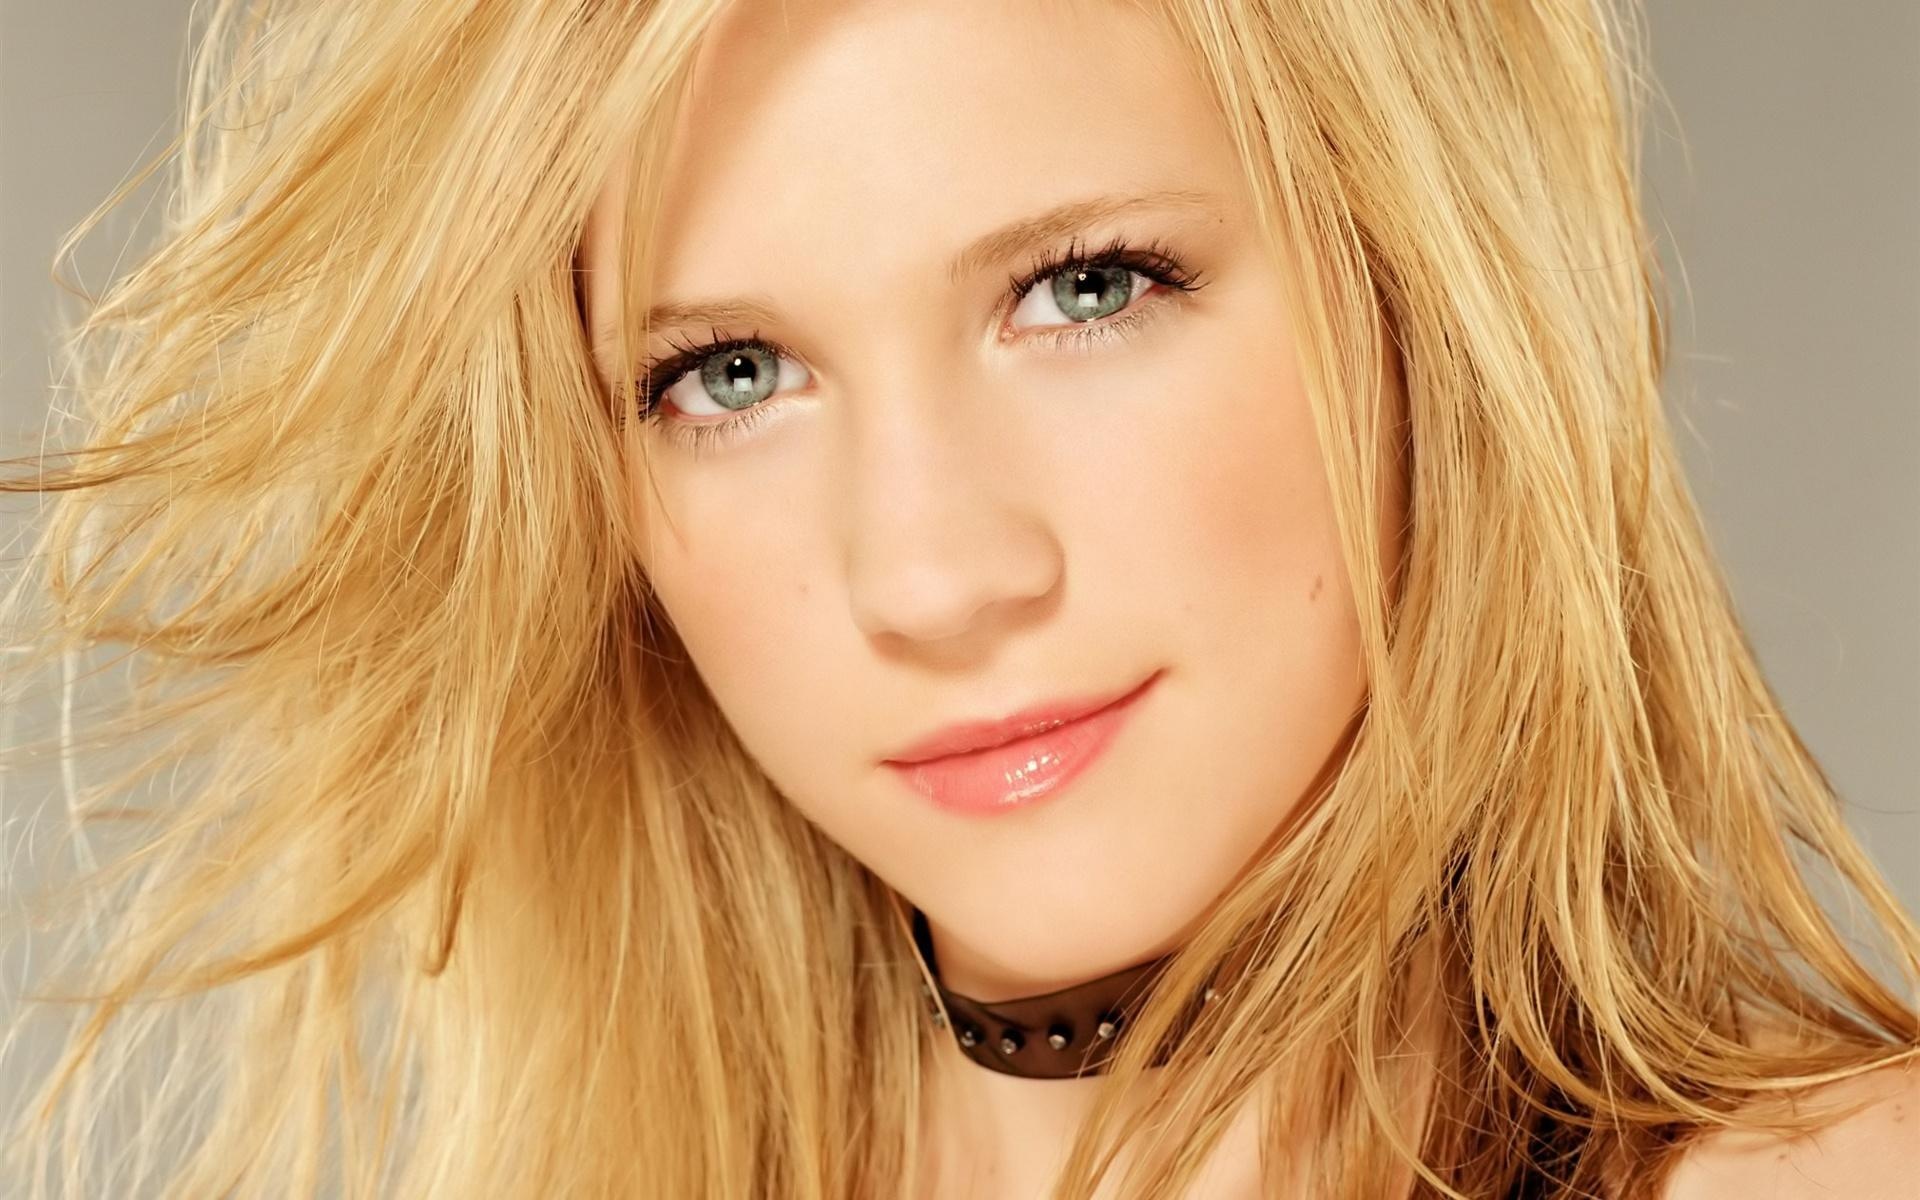 Brittany Snow, Movies, Celebrity pictures, Prominent beauty, 1920x1200 HD Desktop